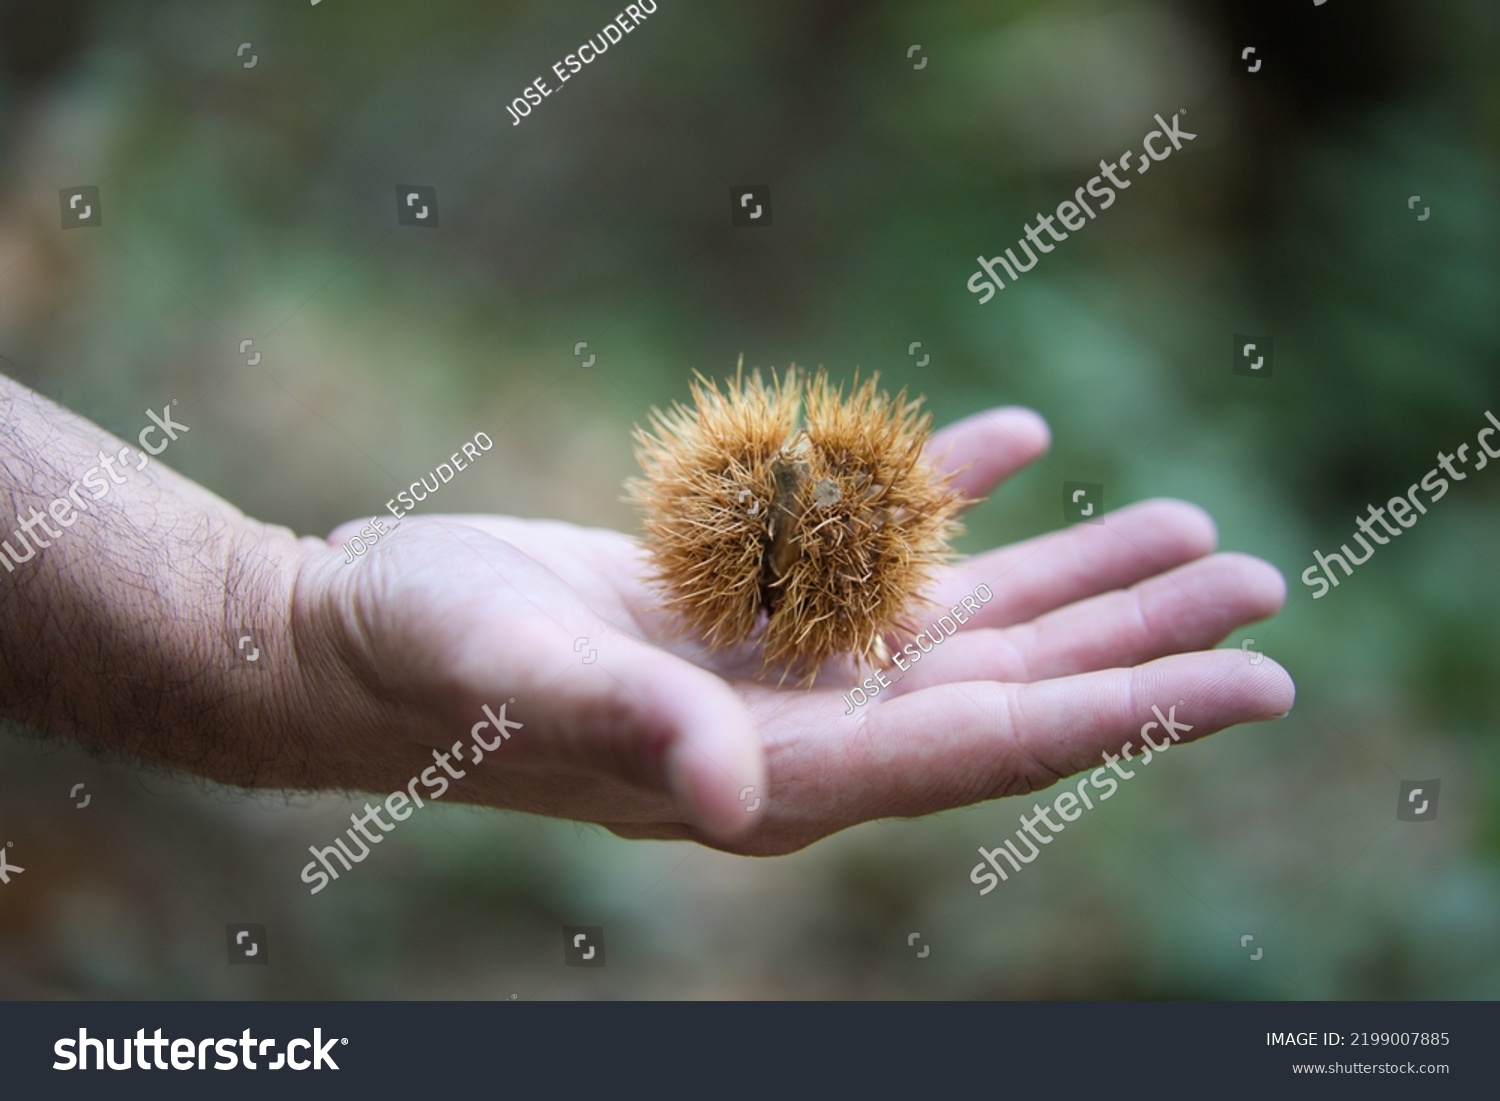 detail of a man's hand holding a chestnut in its spiked shell in his palm. #2199007885